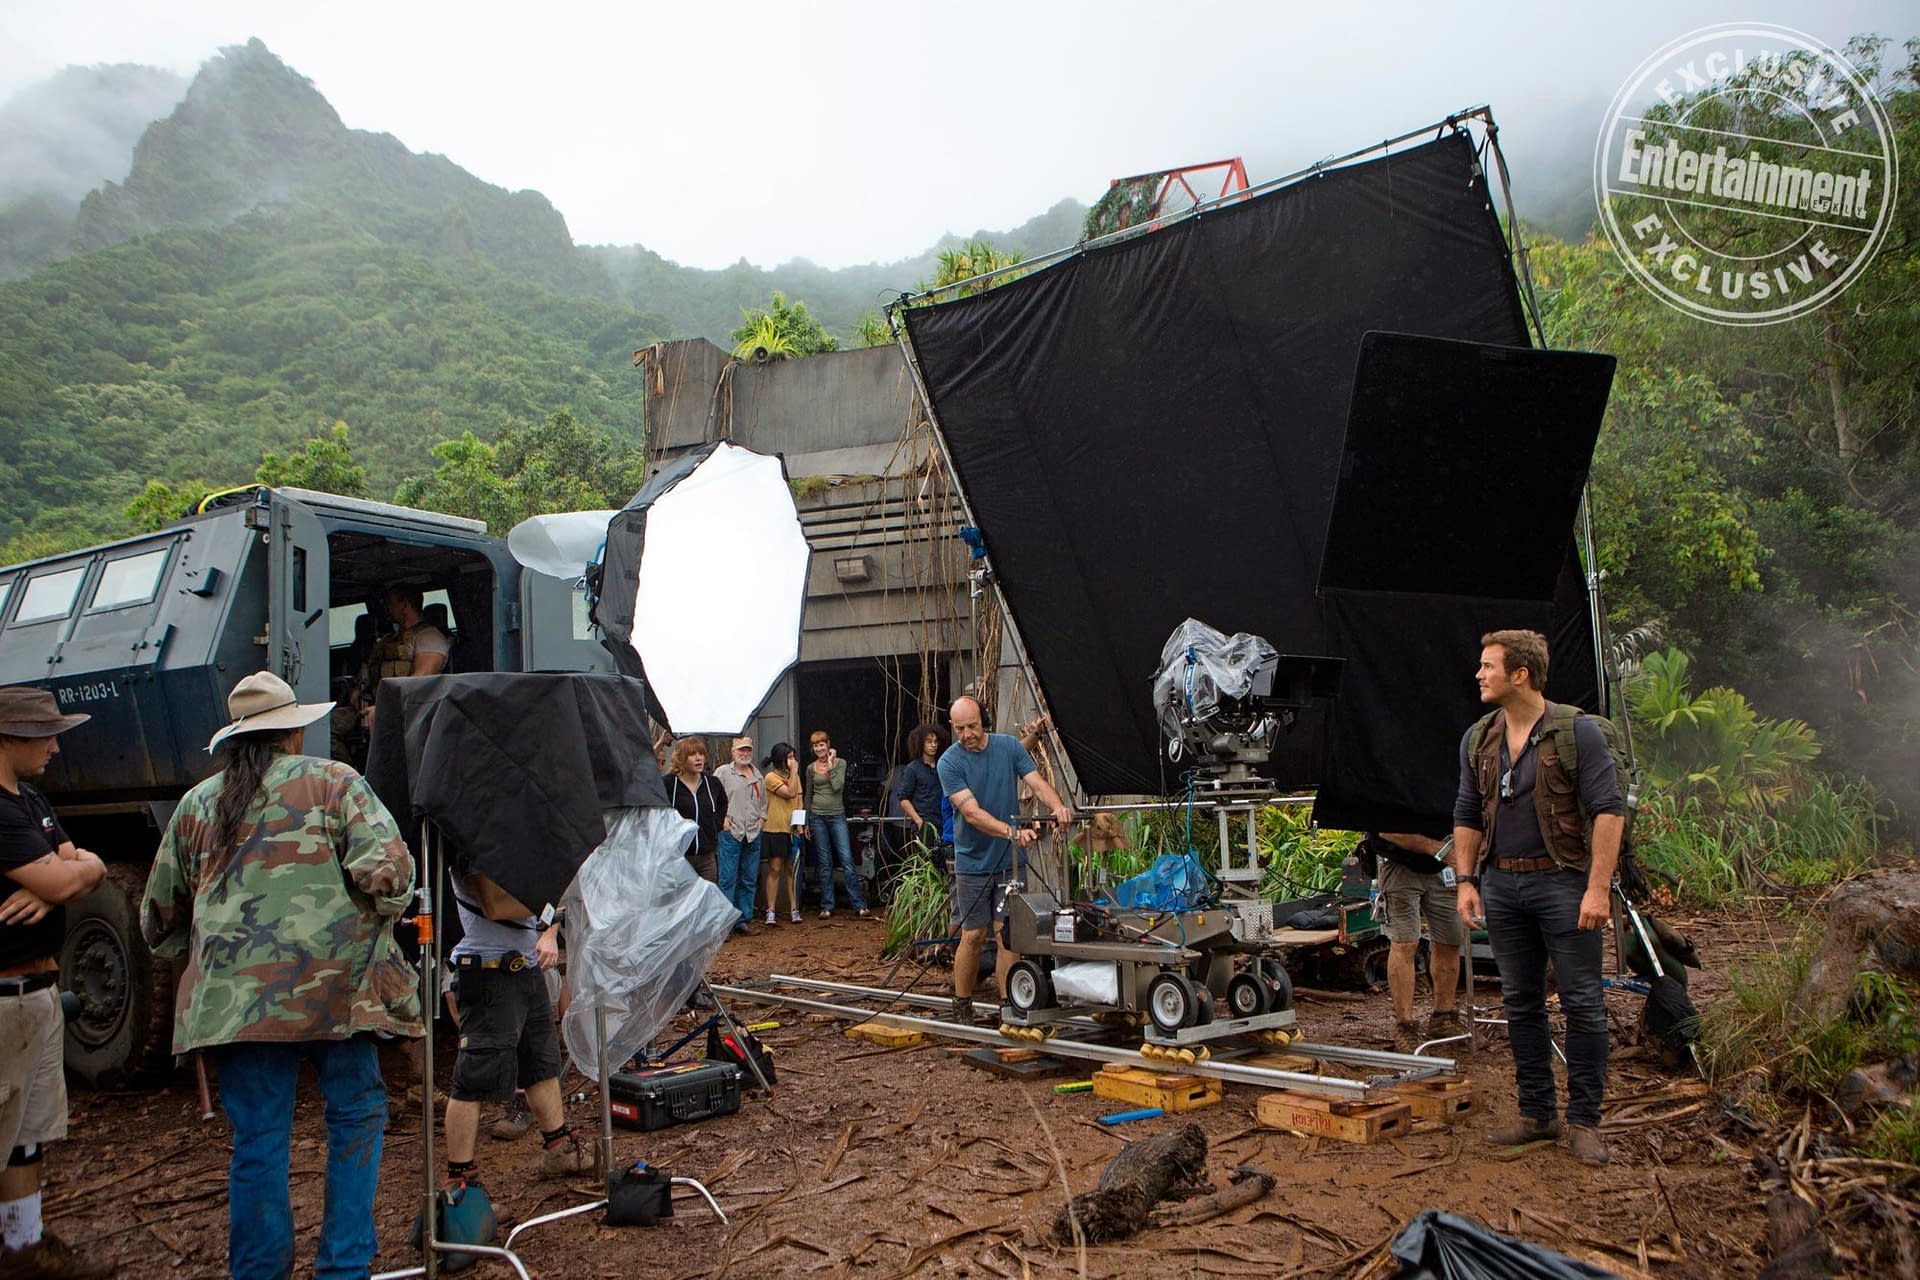 9 New Behind-the-Scenes Pictures from Jurassic World: Fallen Kingdom